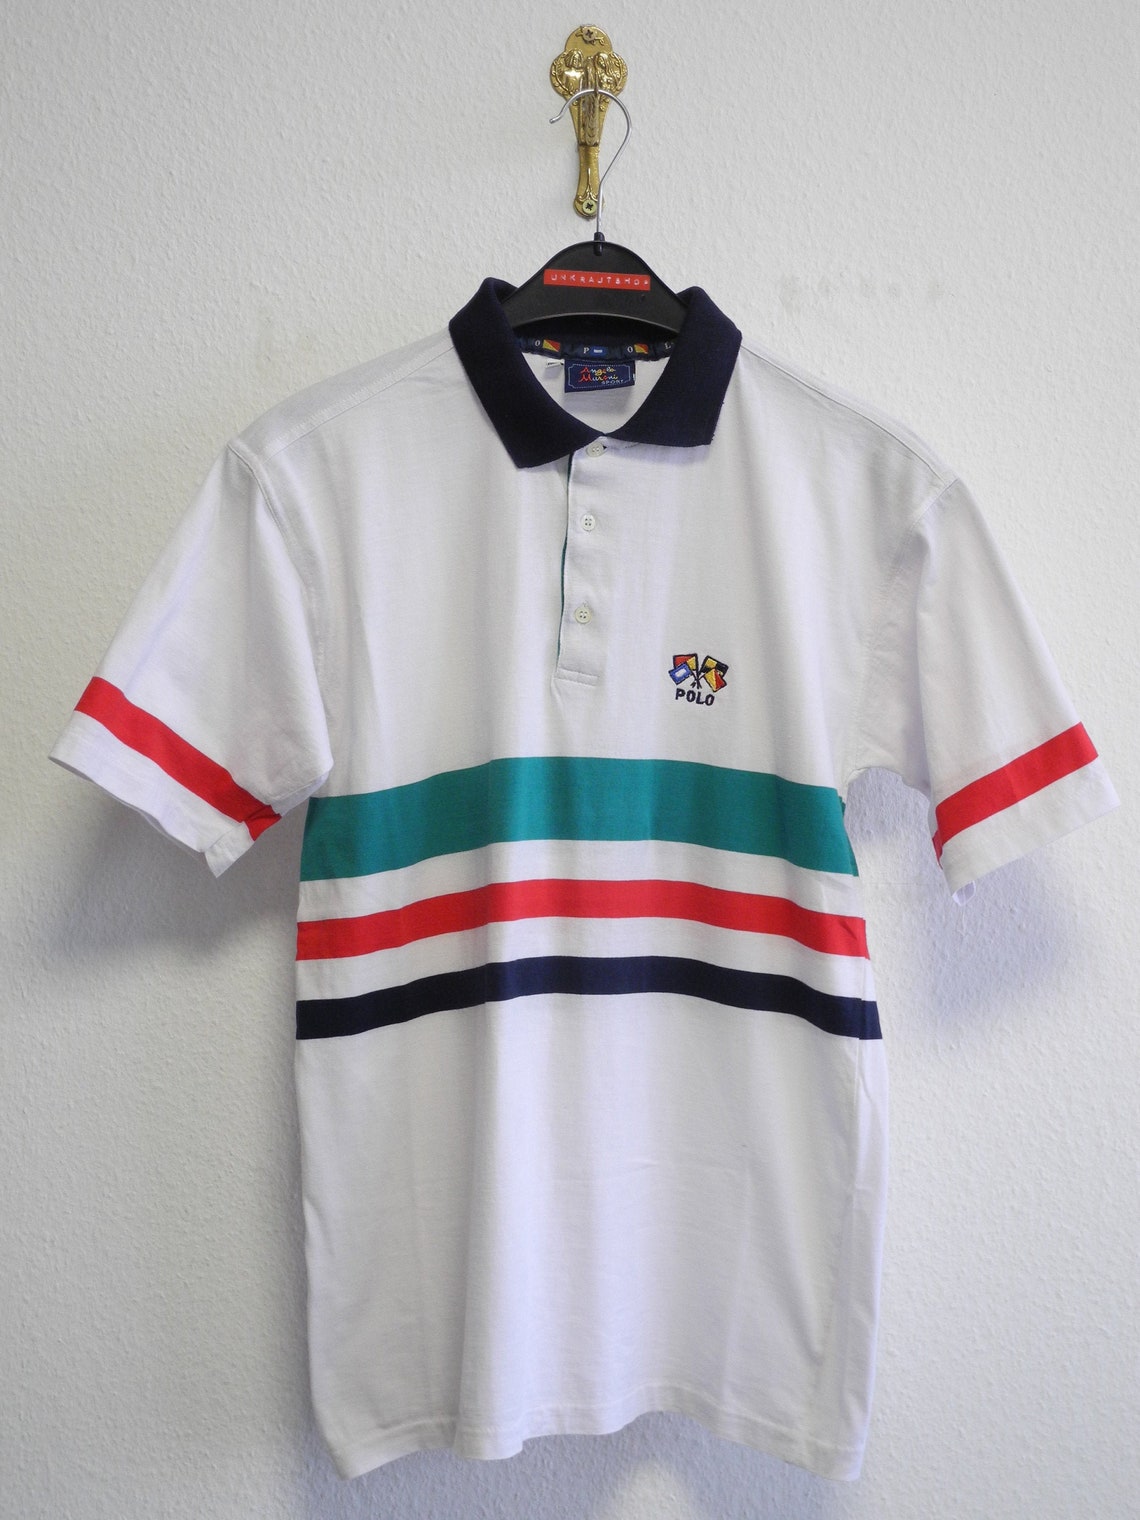 Angelo Muroni Vintage 90s Polo Shirt M/L White Green Blue Red | Etsy